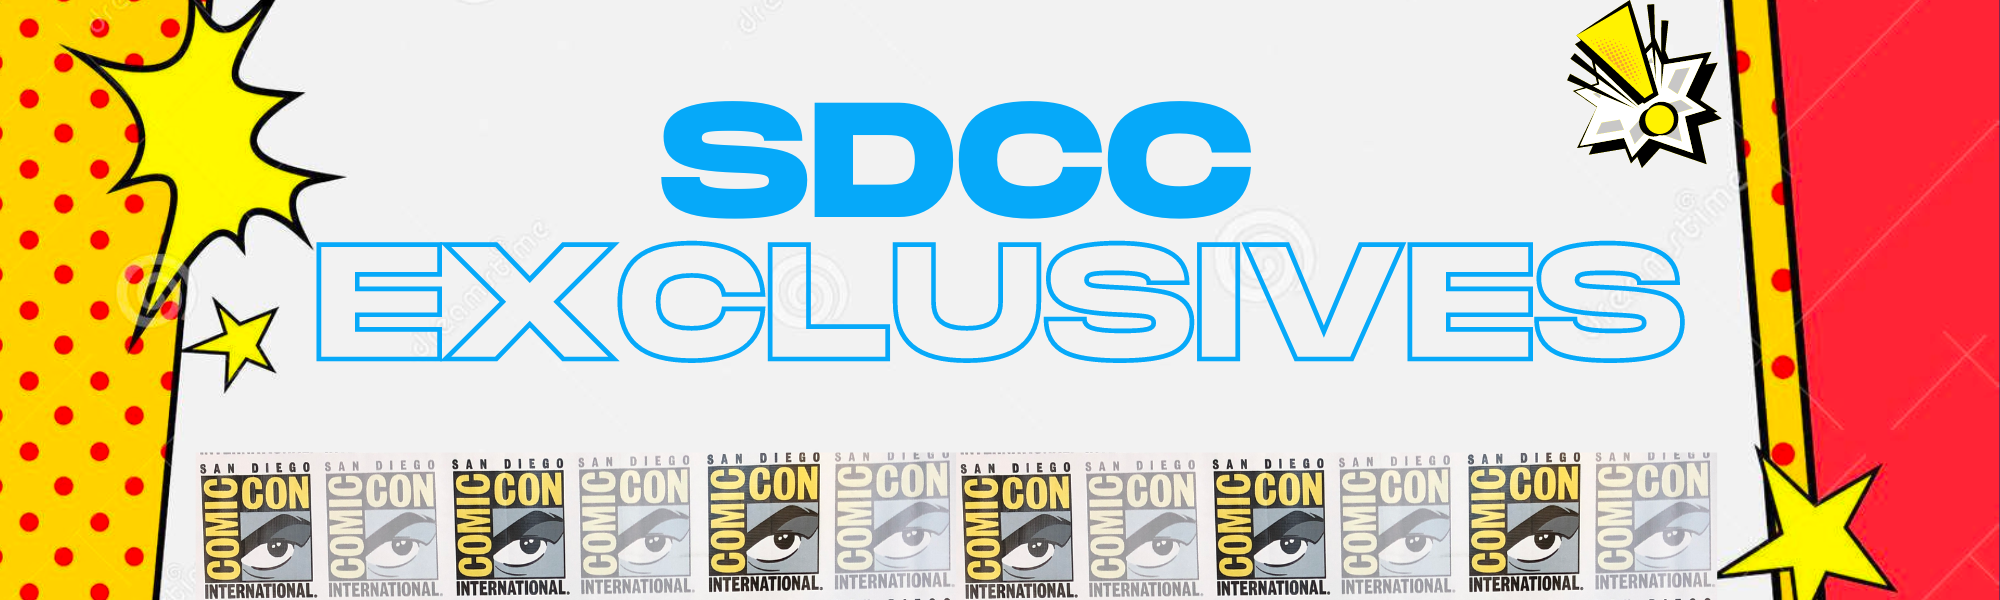 SDCC EXCLUSIVES